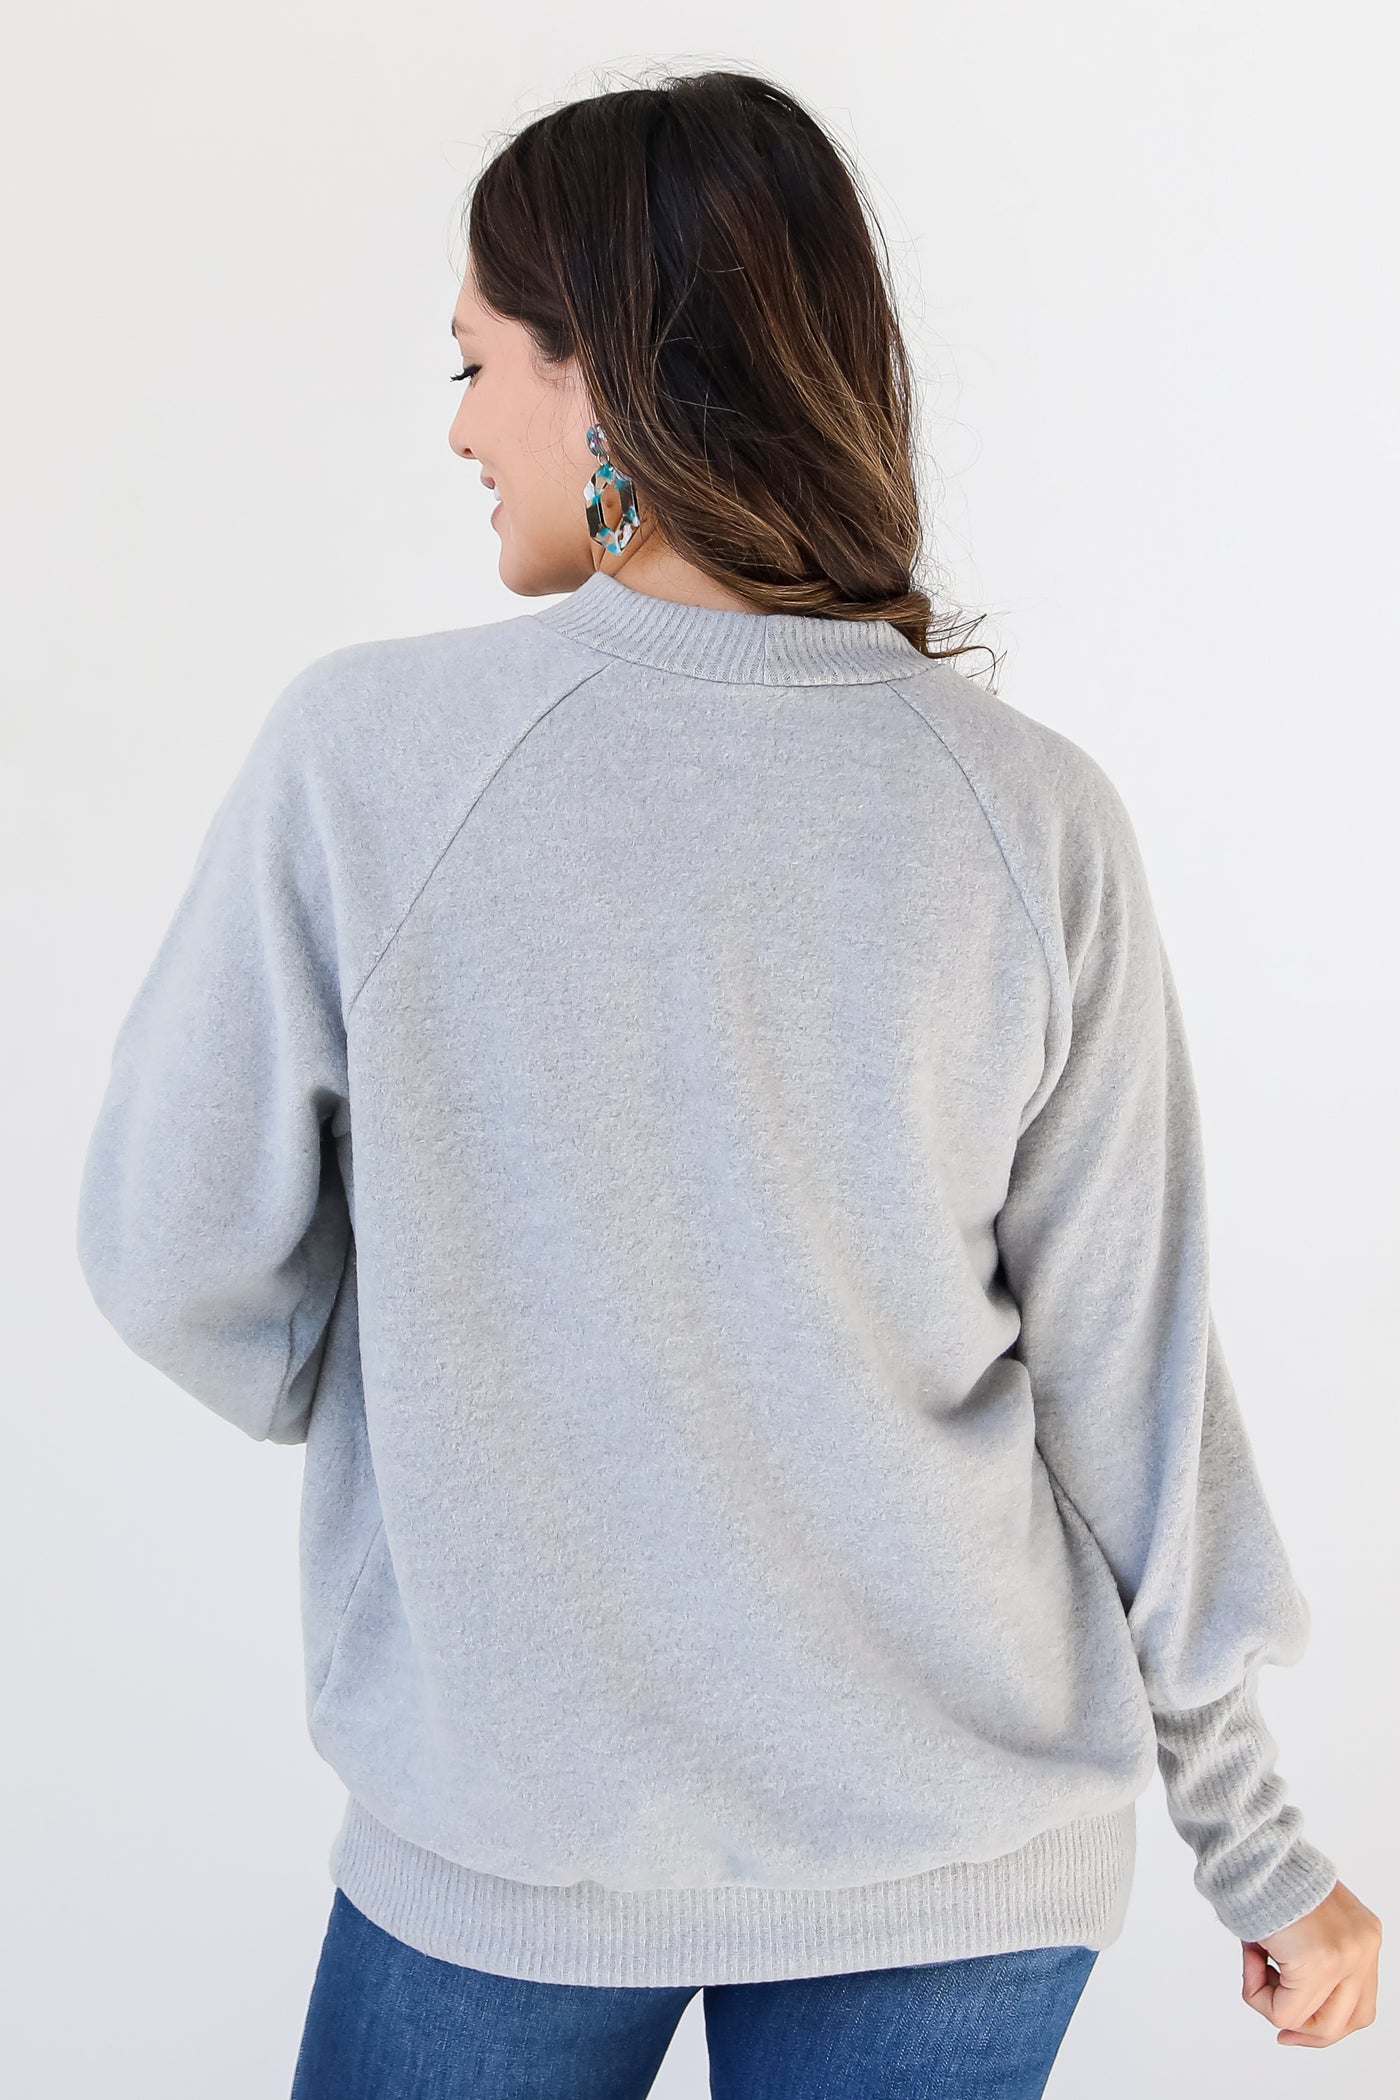 Cozy Brushed Knit Top back view